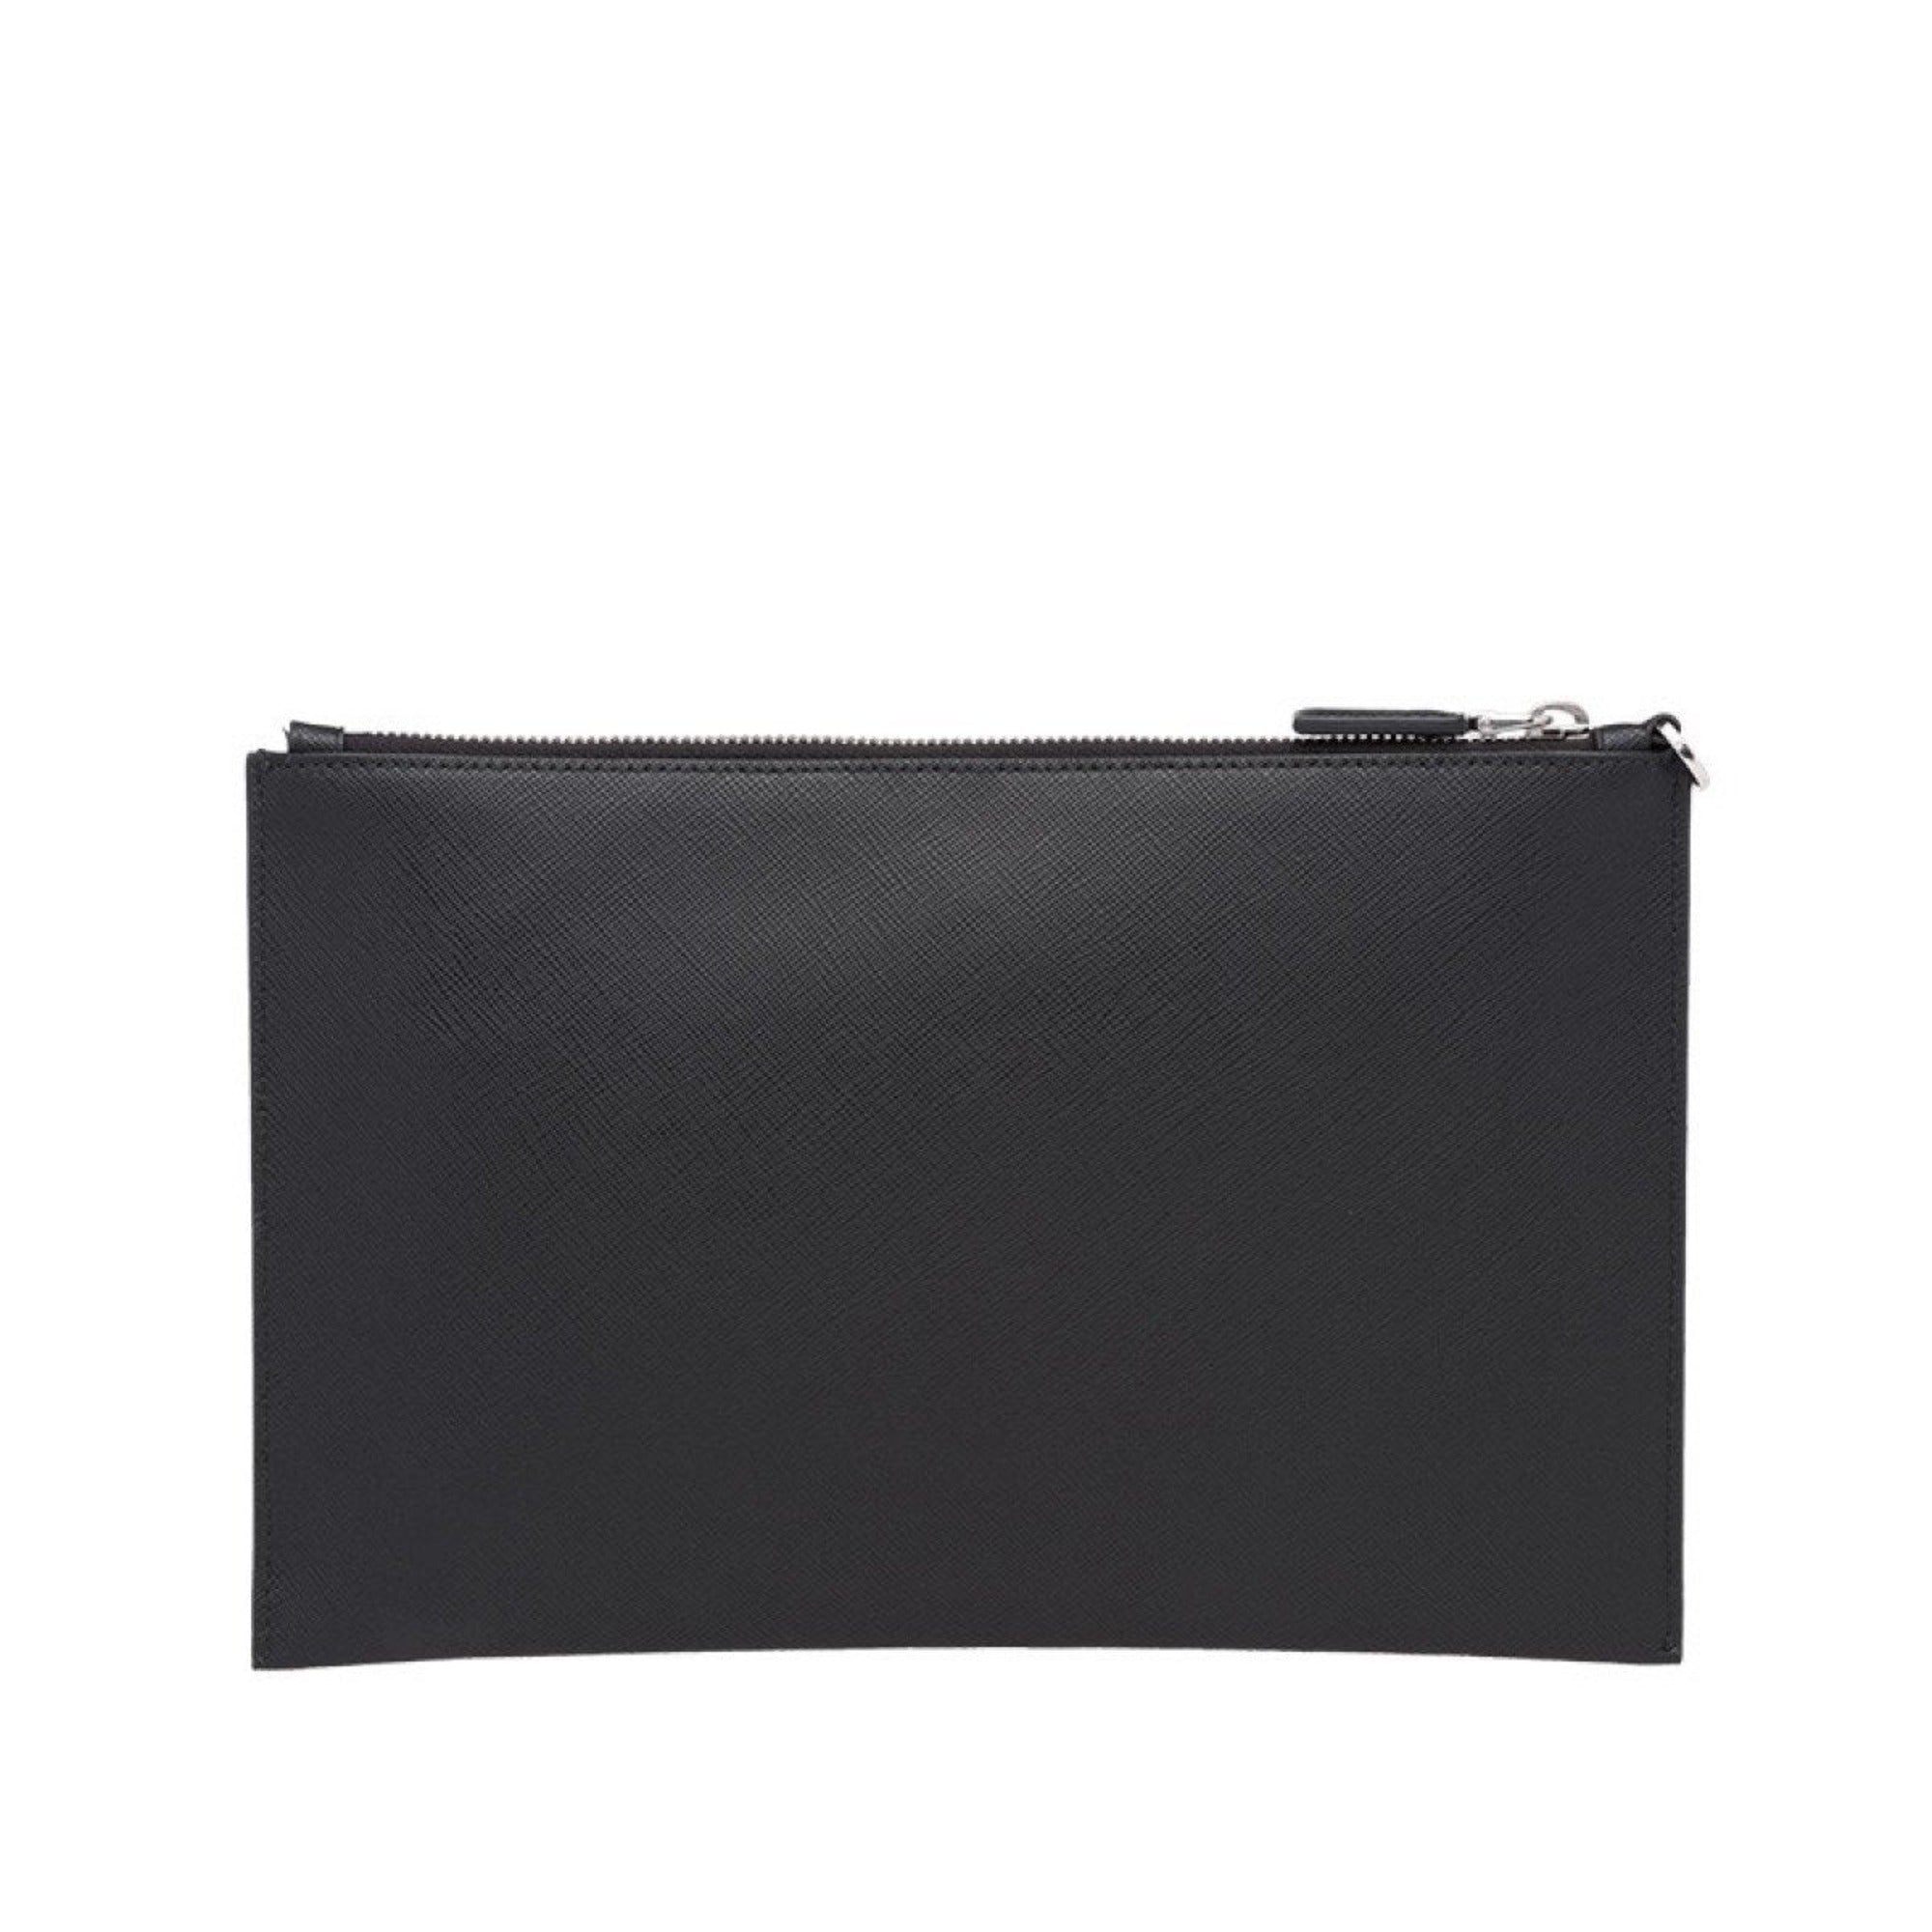 Prada Black Saffiano Voyage Leather Clutch Document Holder 2NG005 at_Queen_Bee_of_Beverly_Hills